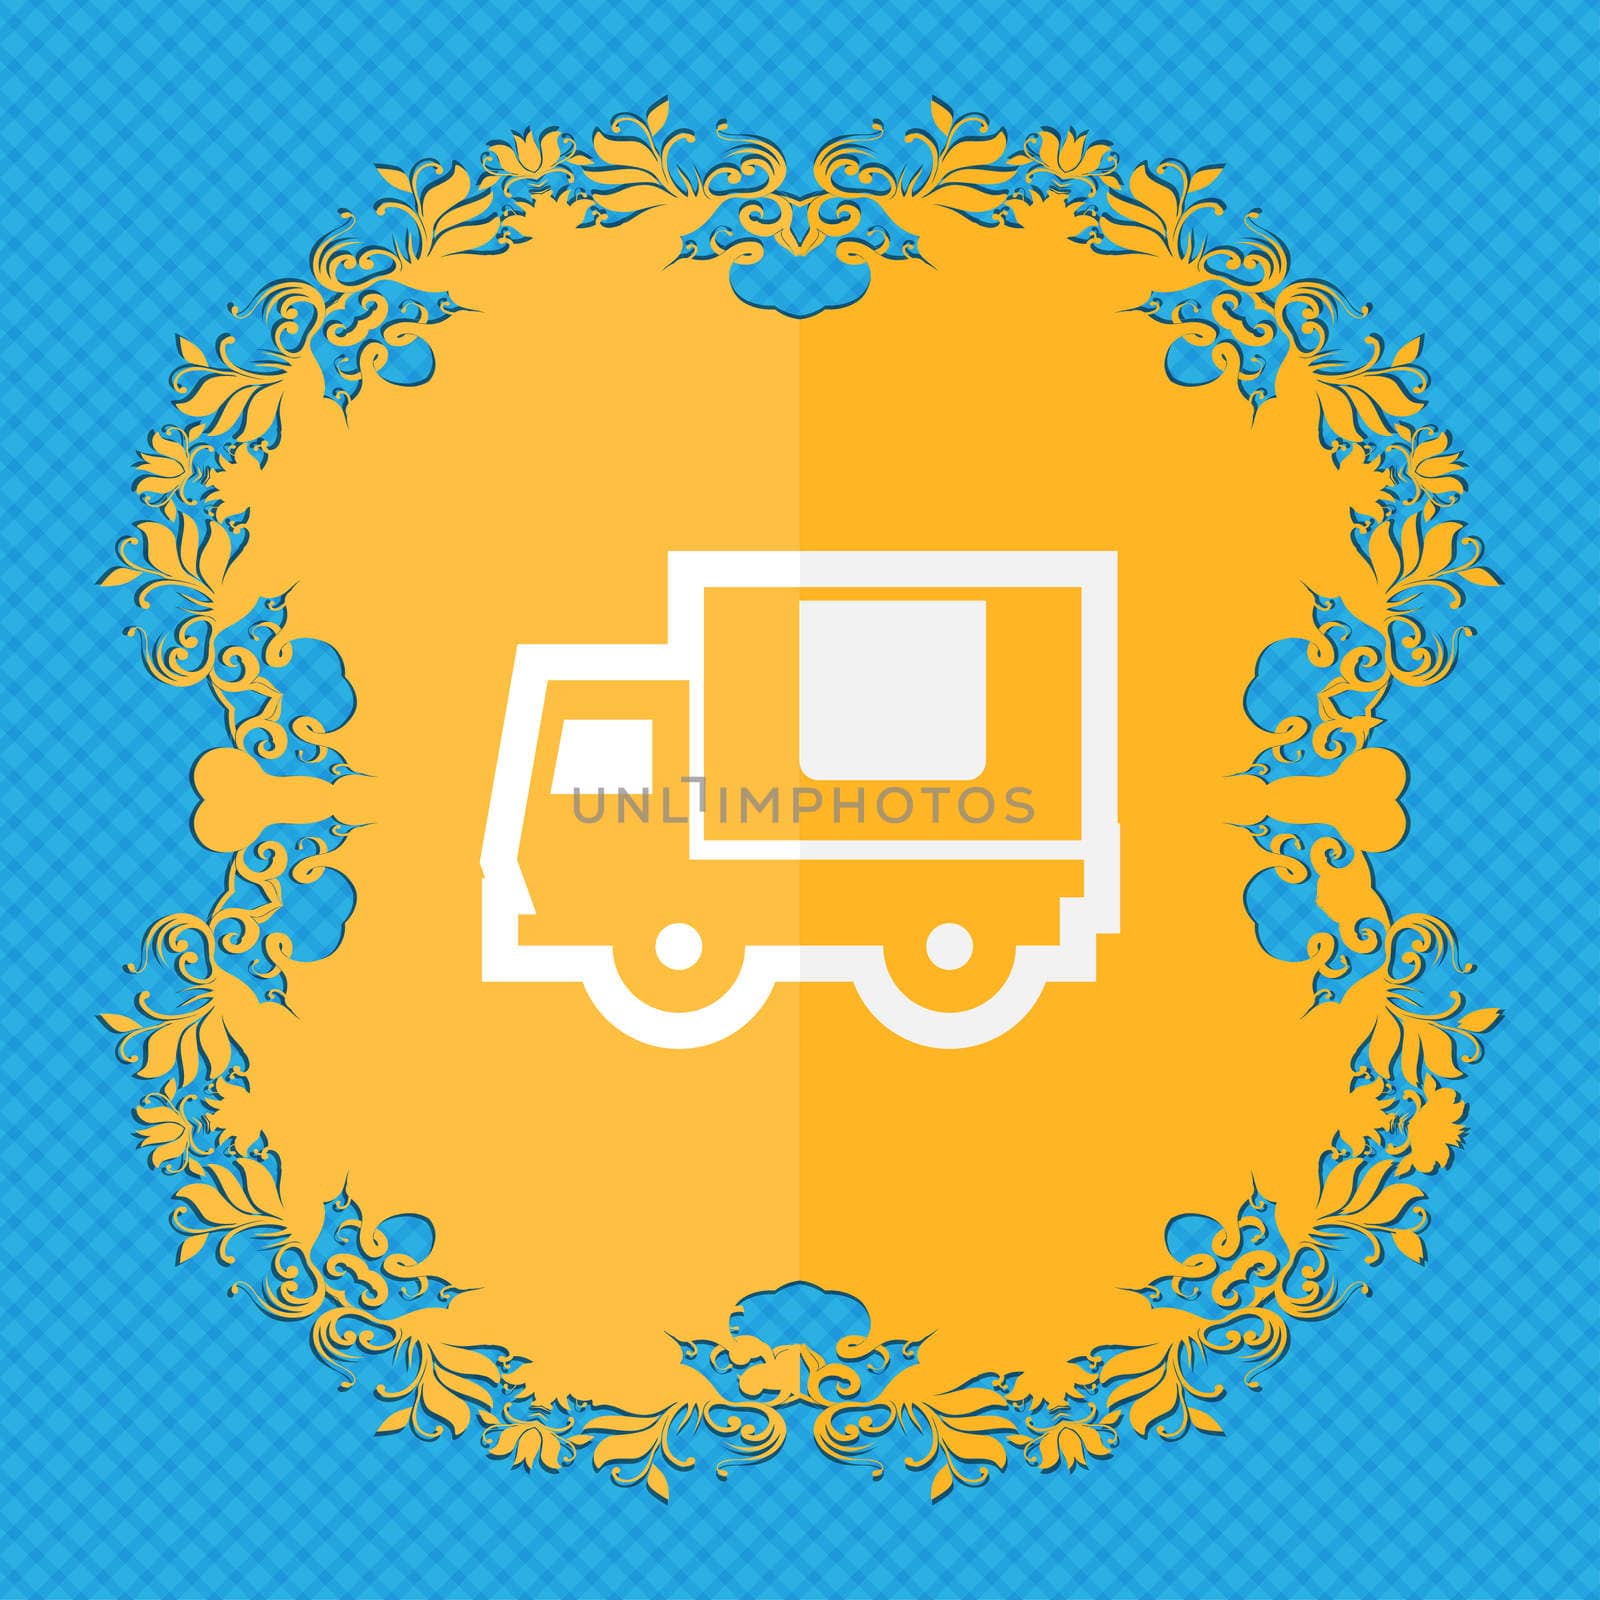 Delivery truck . Floral flat design on a blue abstract background with place for your text. illustration